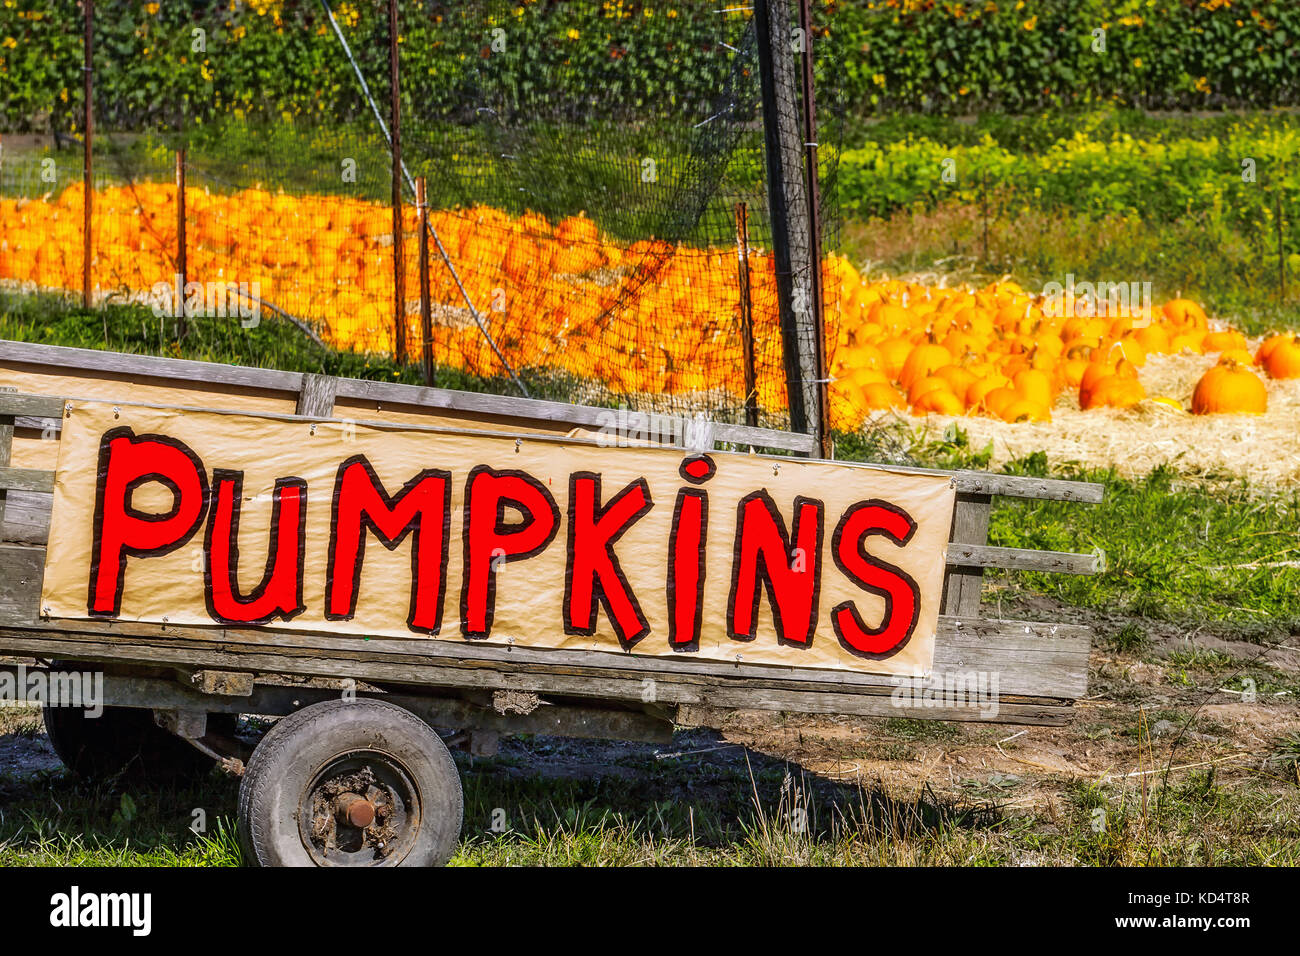 Roadside cart with a handmade sign in bright red letters advertising pumpkins for sale. Pumpkin patch in the background. Picturesque country scene. Stock Photo